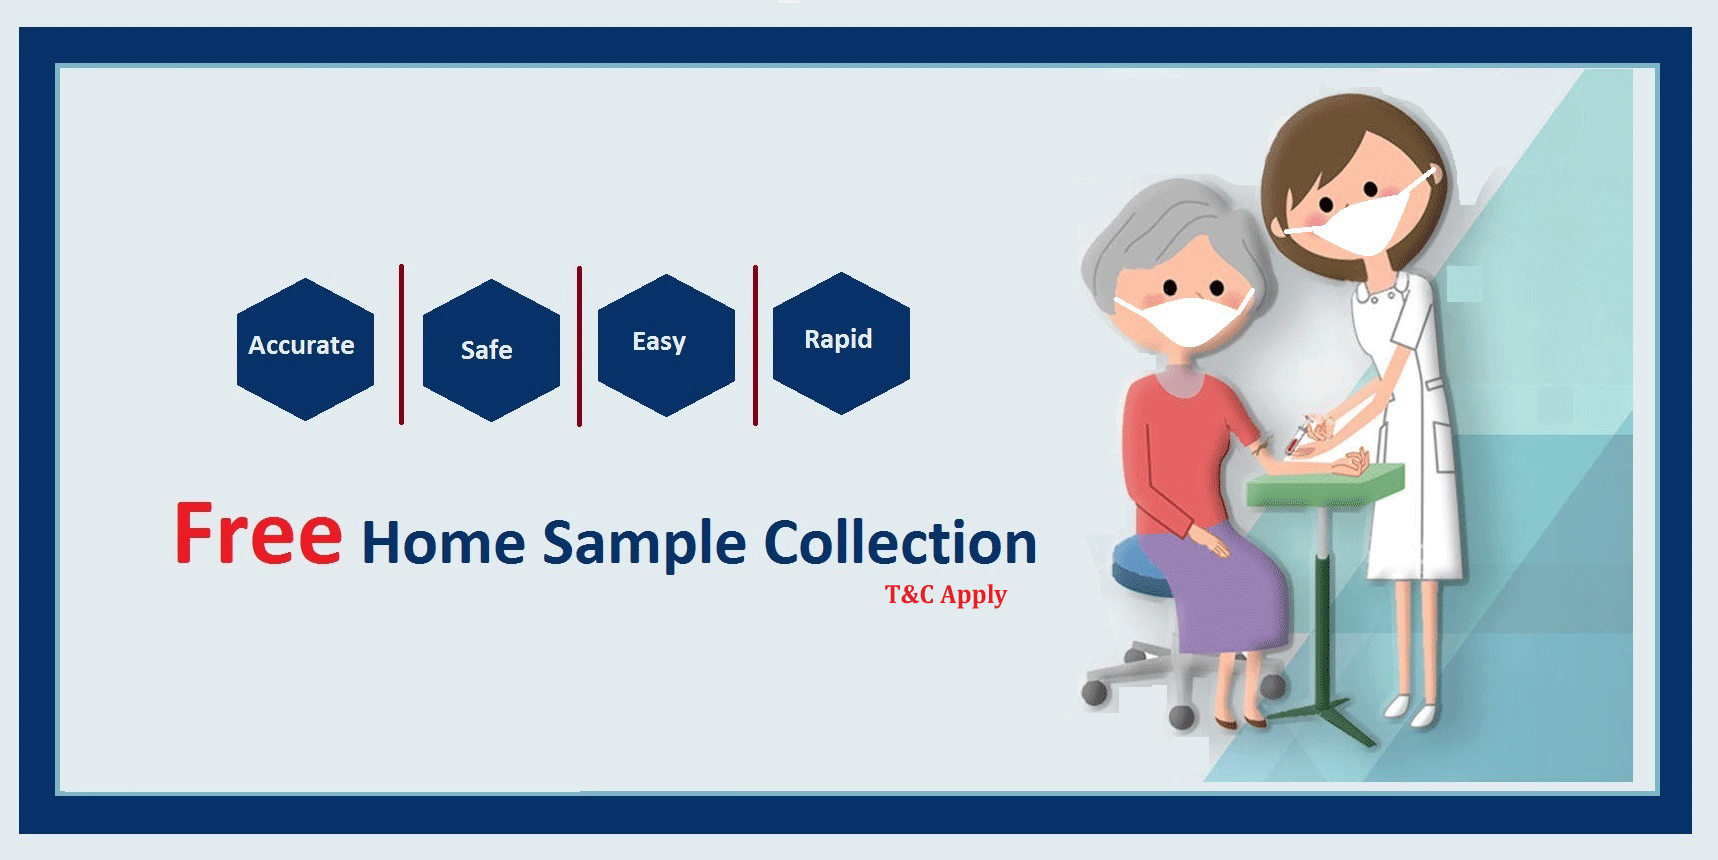 Sample collection free